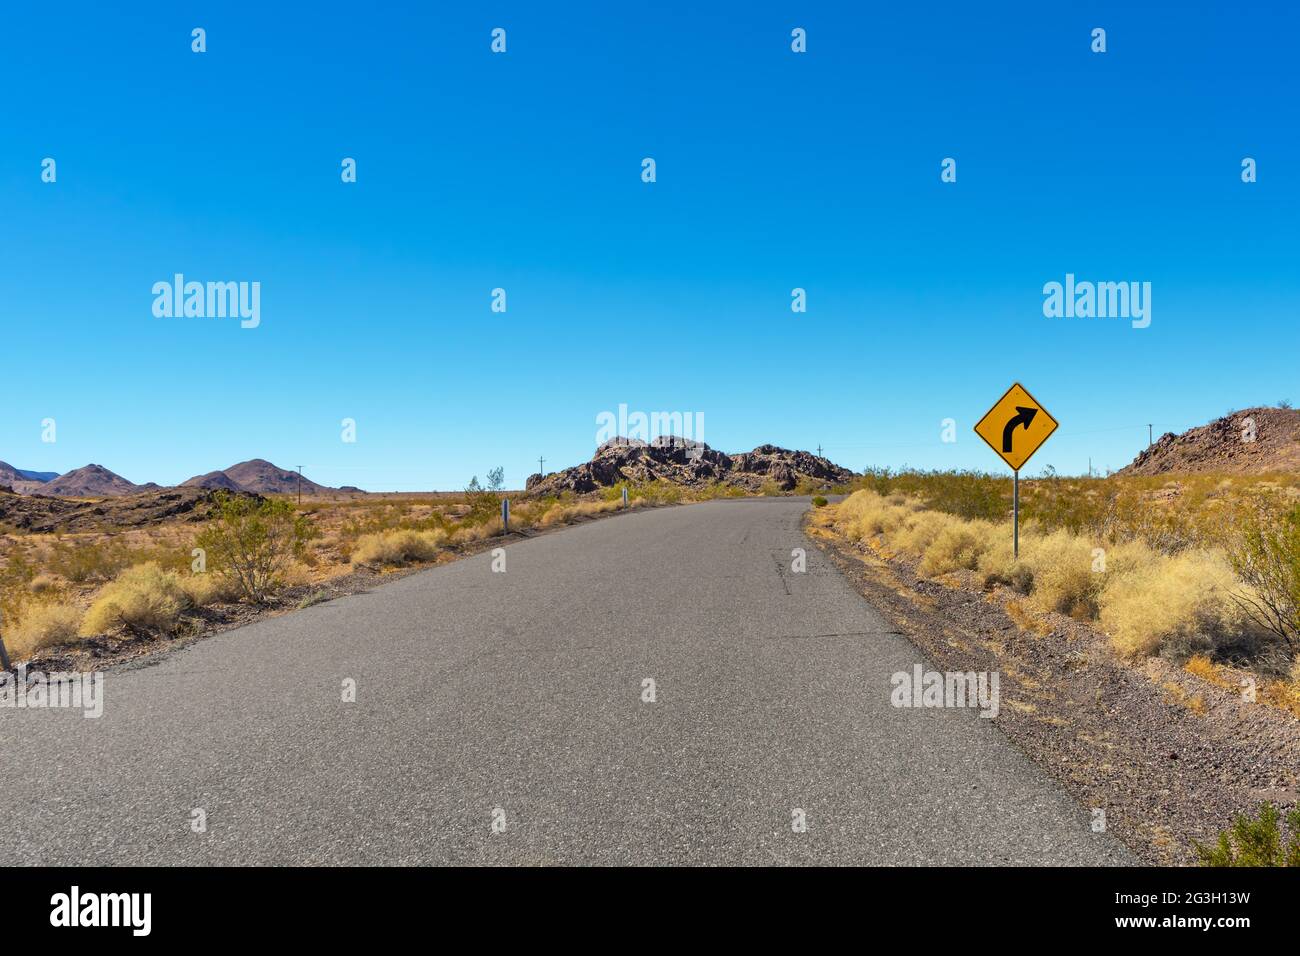 Road in the Mojave Desert with a caution sign and clear blue sky Stock Photo